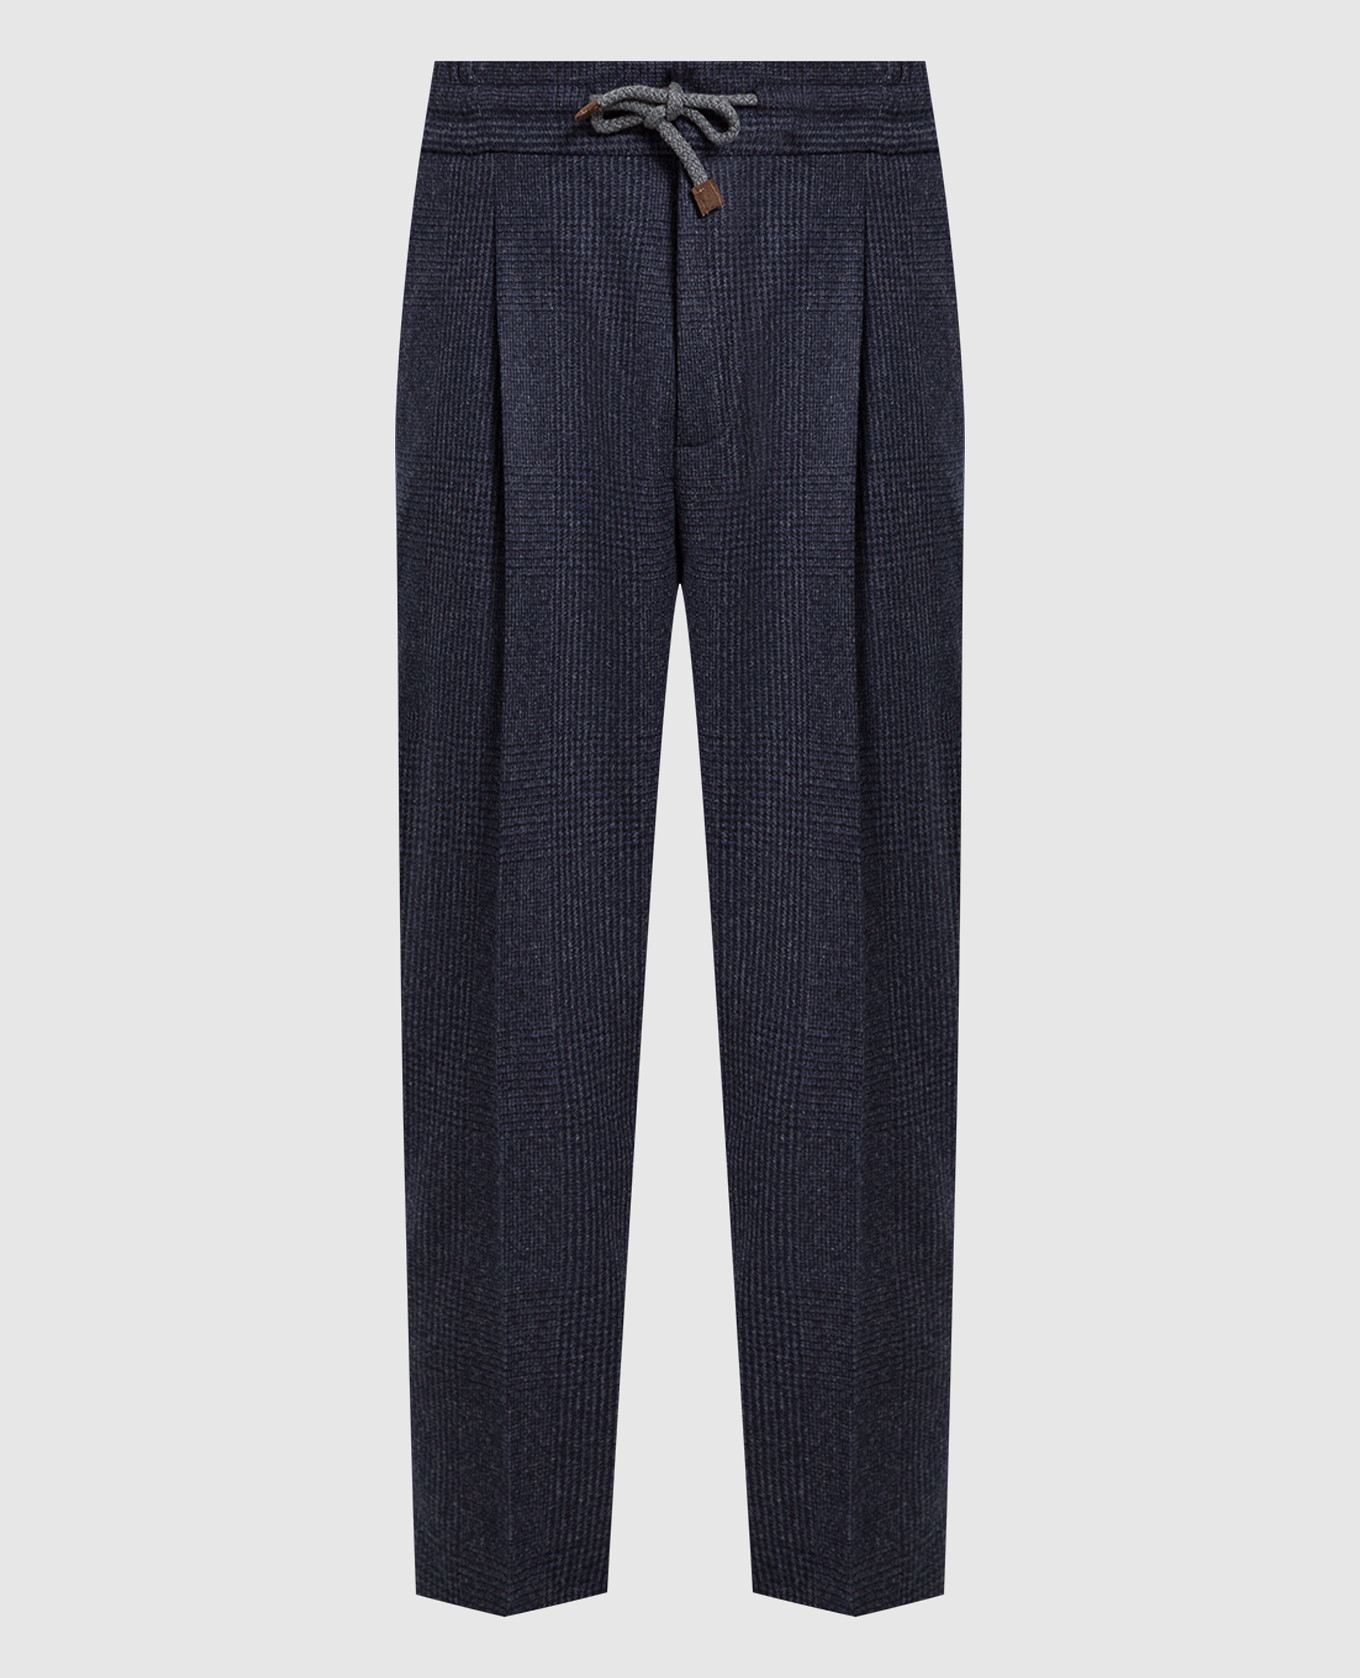 Navy check wool trousers